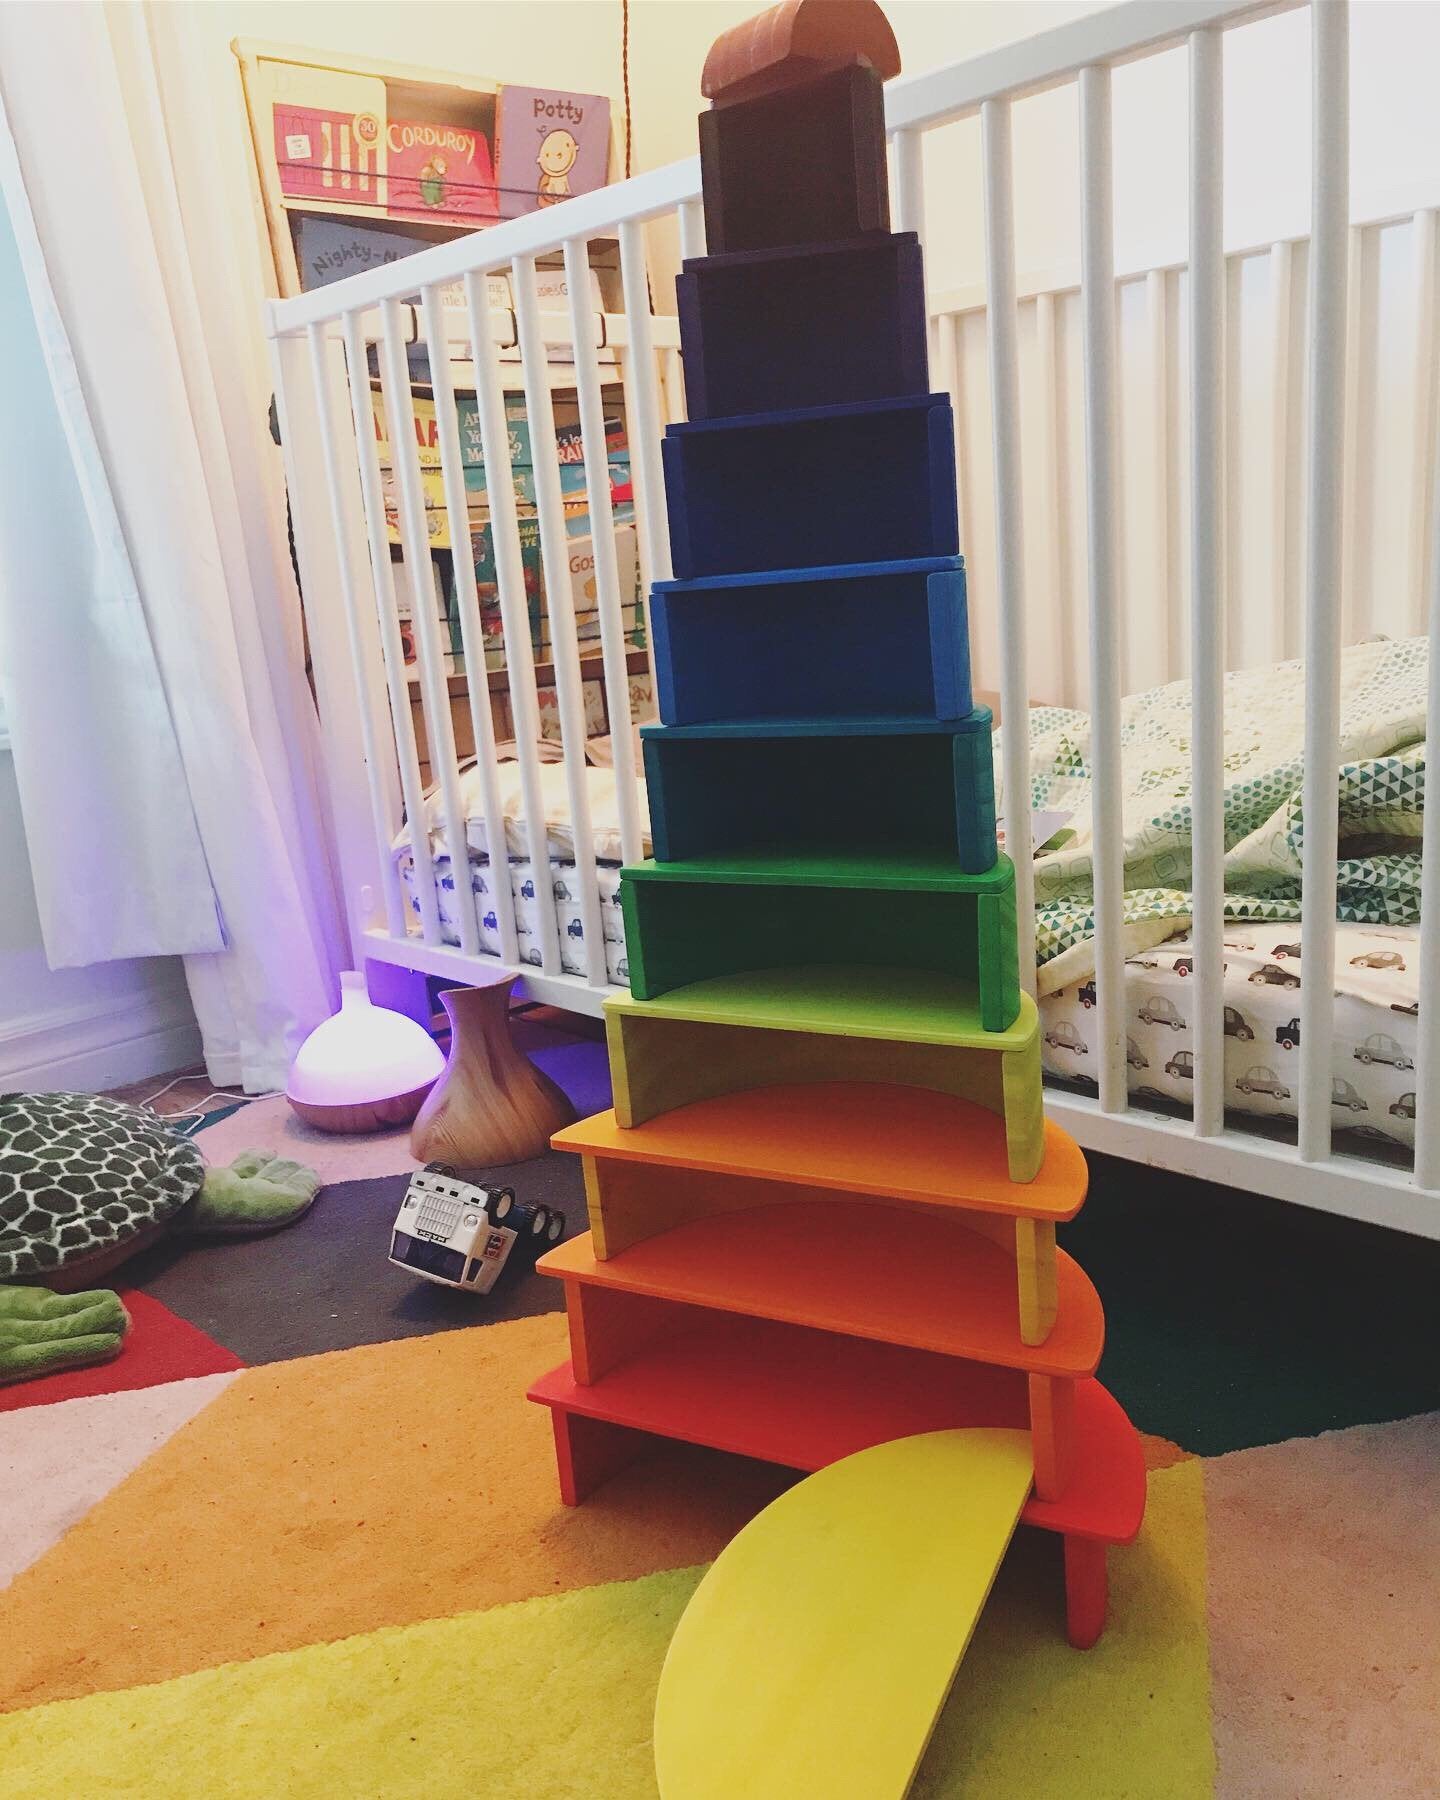 Wood Wood Exclusive EXTRA LARGE Rainbow Montessori Stacker - Wood Wood Toys Canada's Favourite Montessori Toy Store